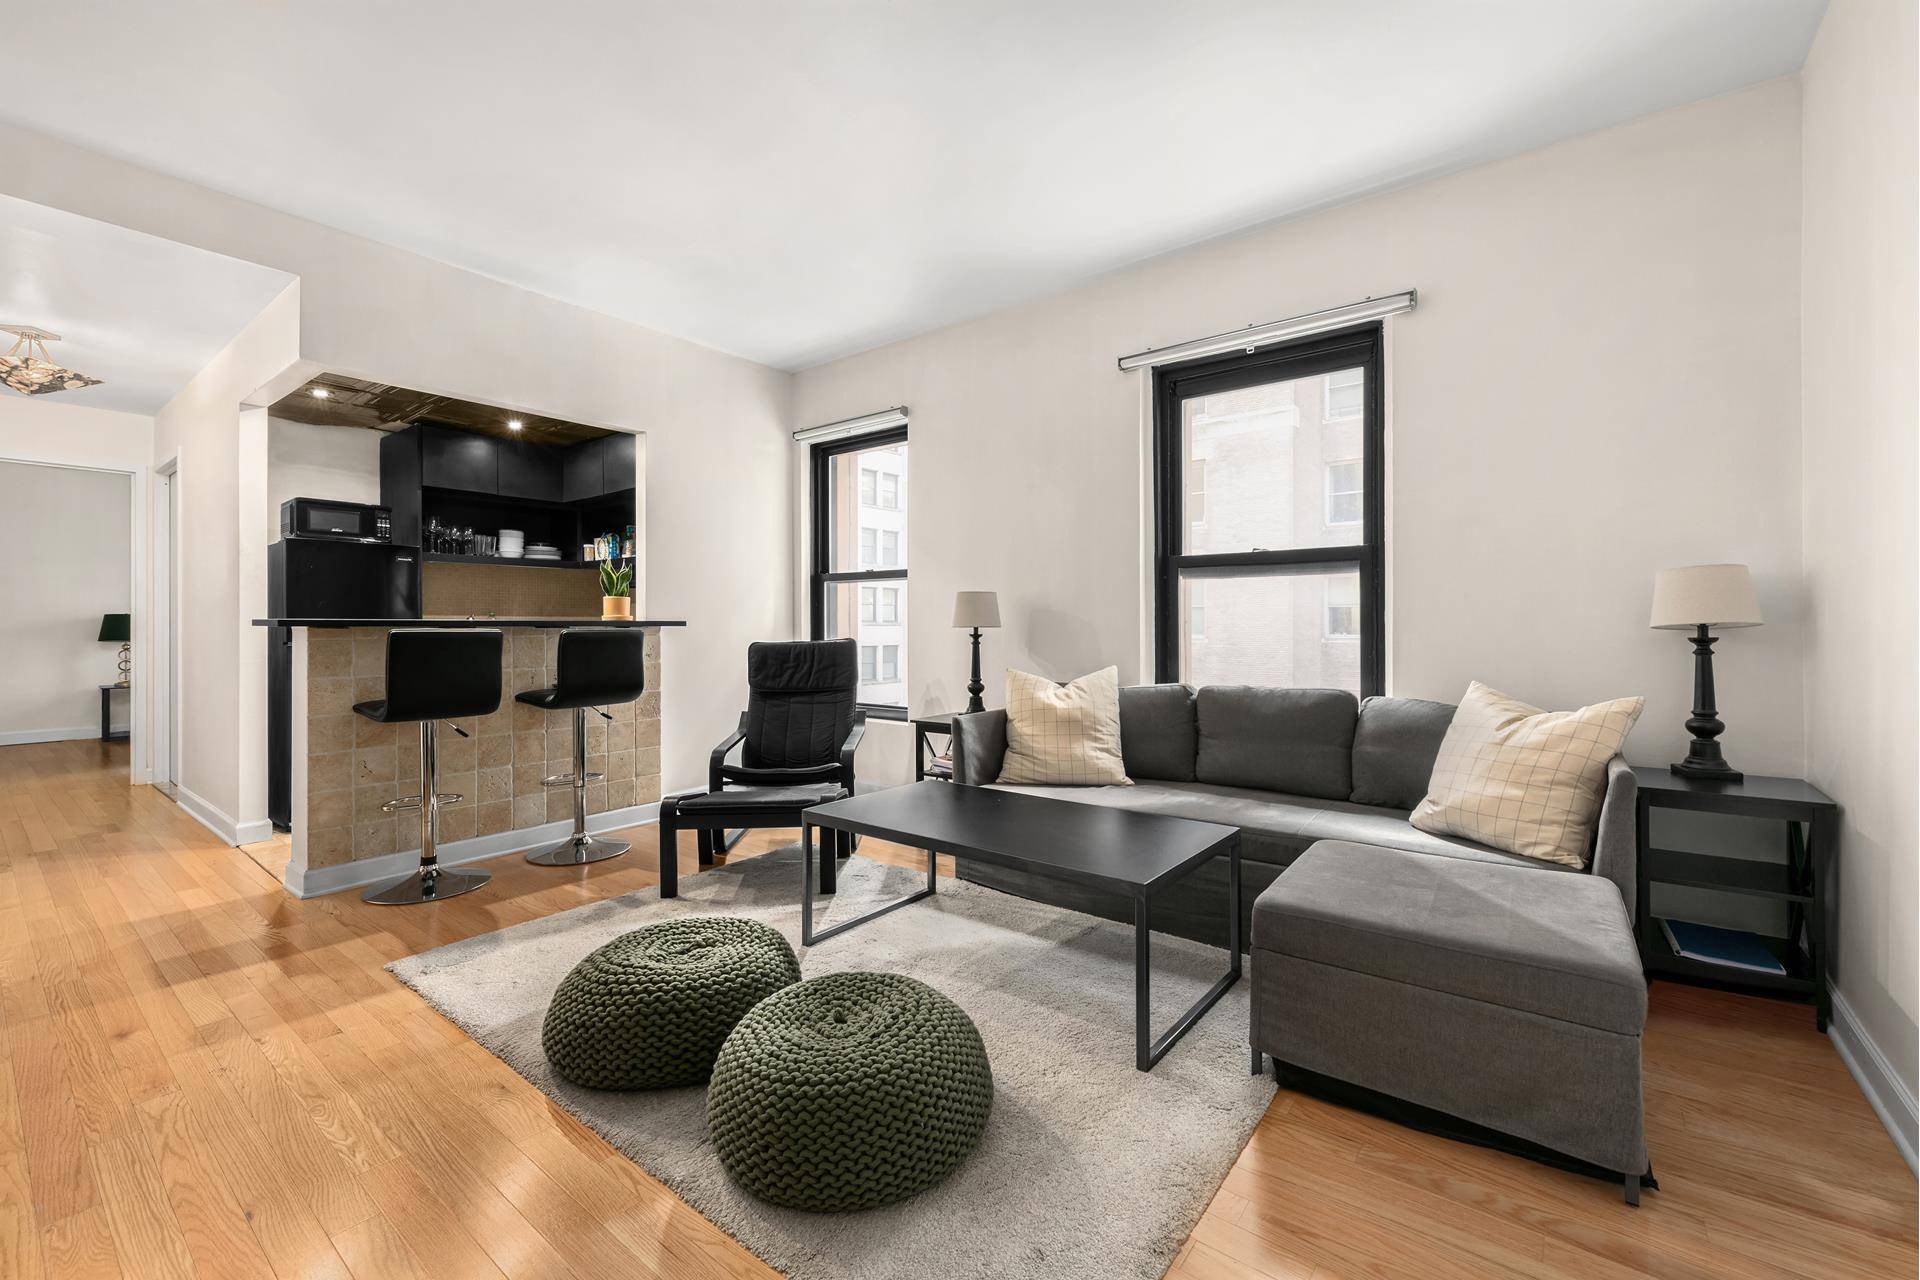 Would you like the lowest priced TRUE 1BR in FiDi ?